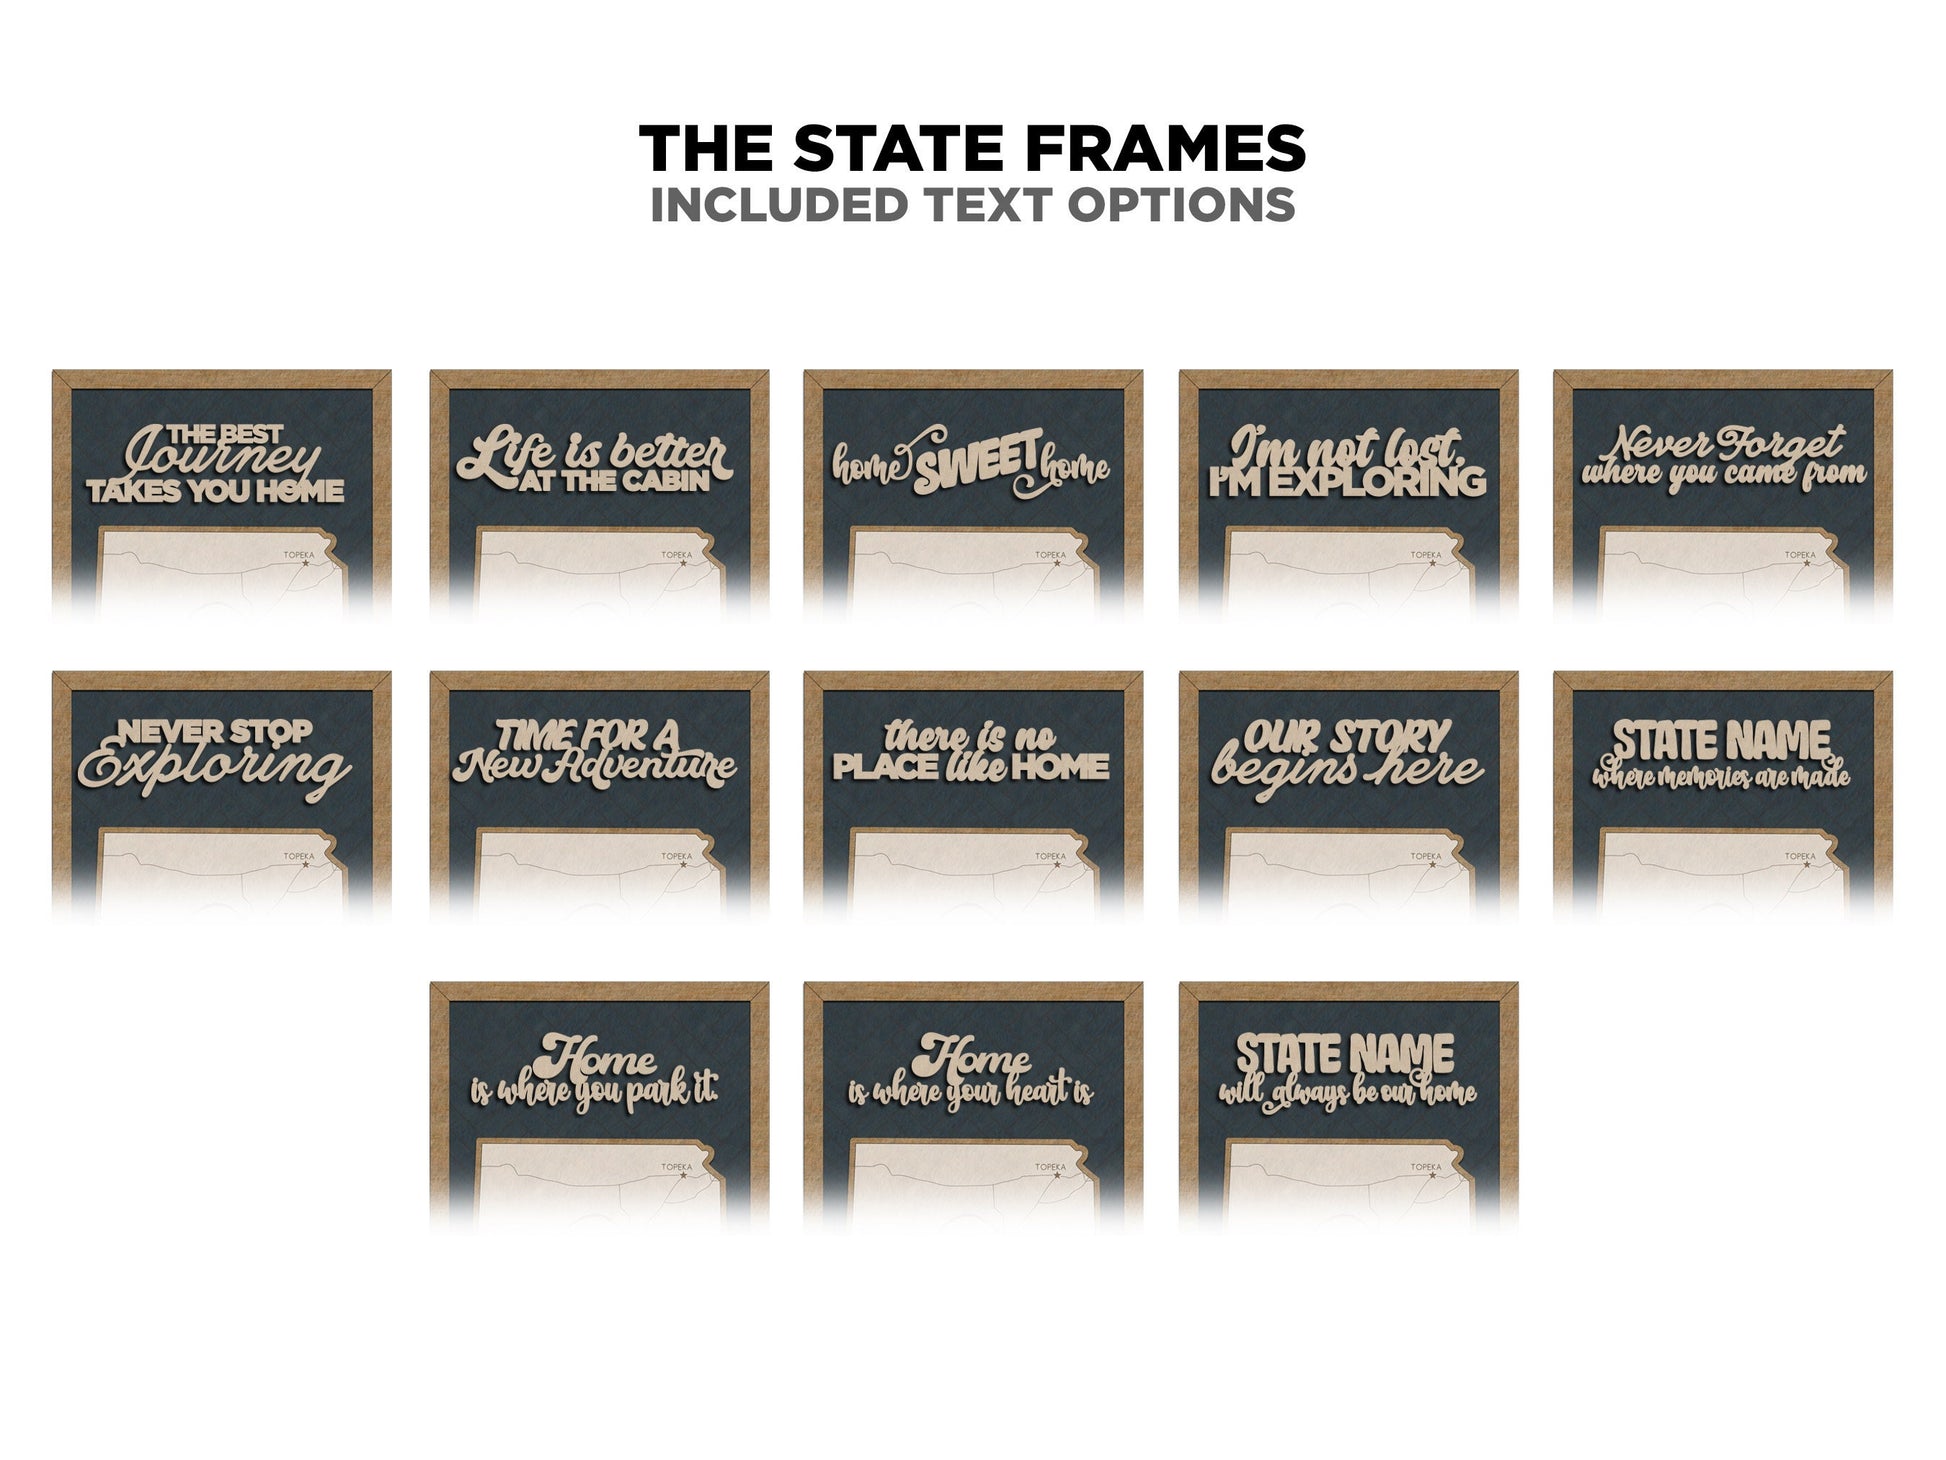 The Indiana State Frame - 13 text options, 12 backgrounds, 25 icons Included - Make over 7,500 designs - Glowforge & Lightburn Tested